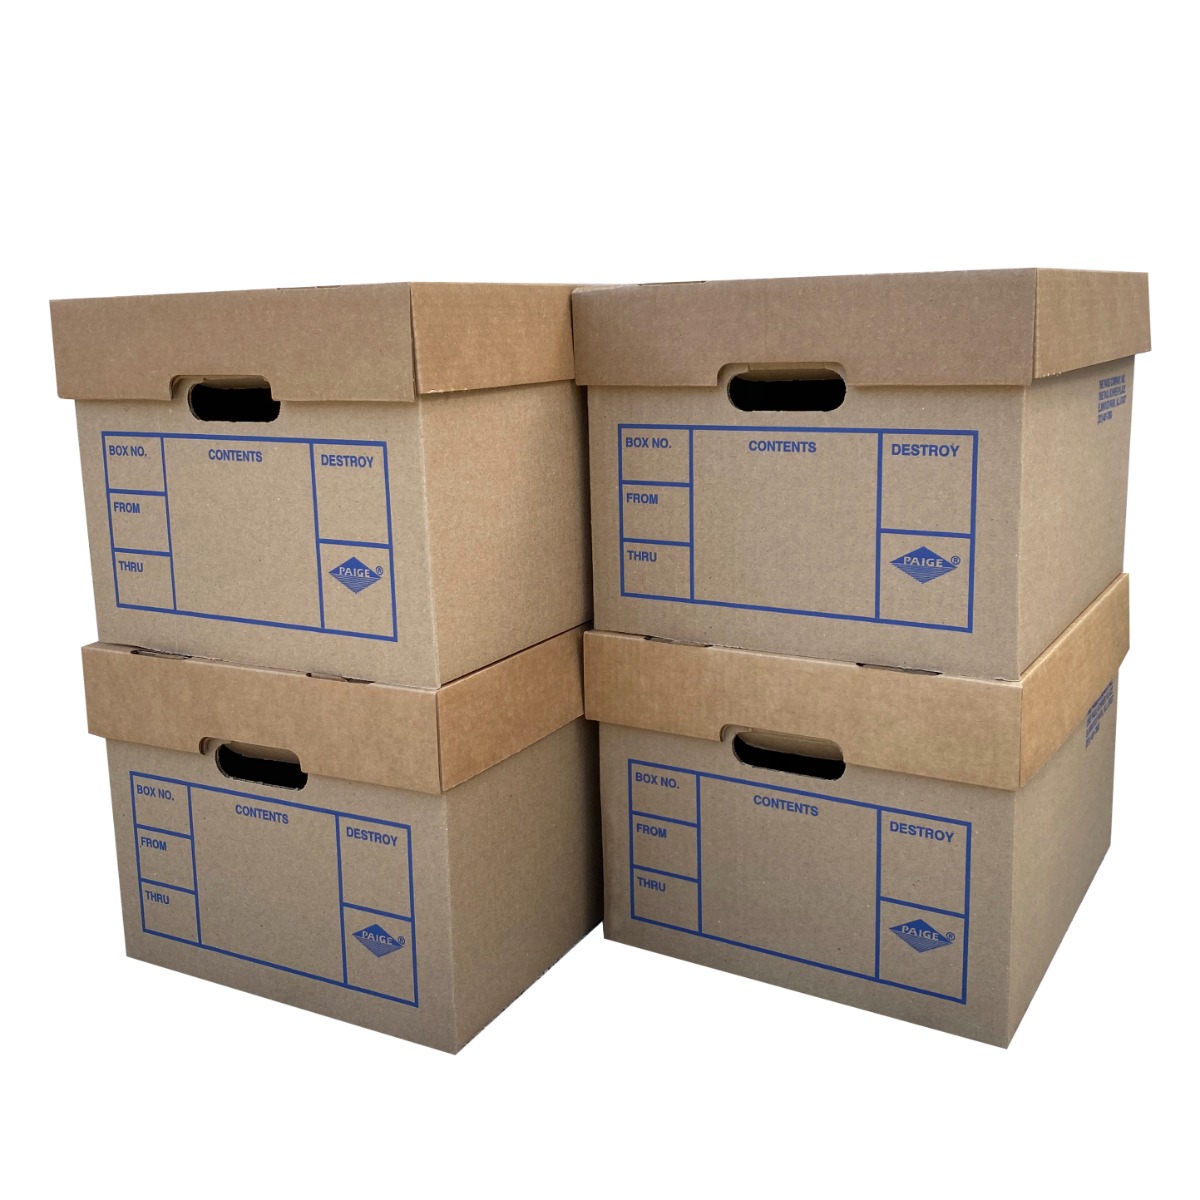  uBoxes 4 Room Basic Kit Moving Boxes & Packing Materials : Box  Mailers : Office Products